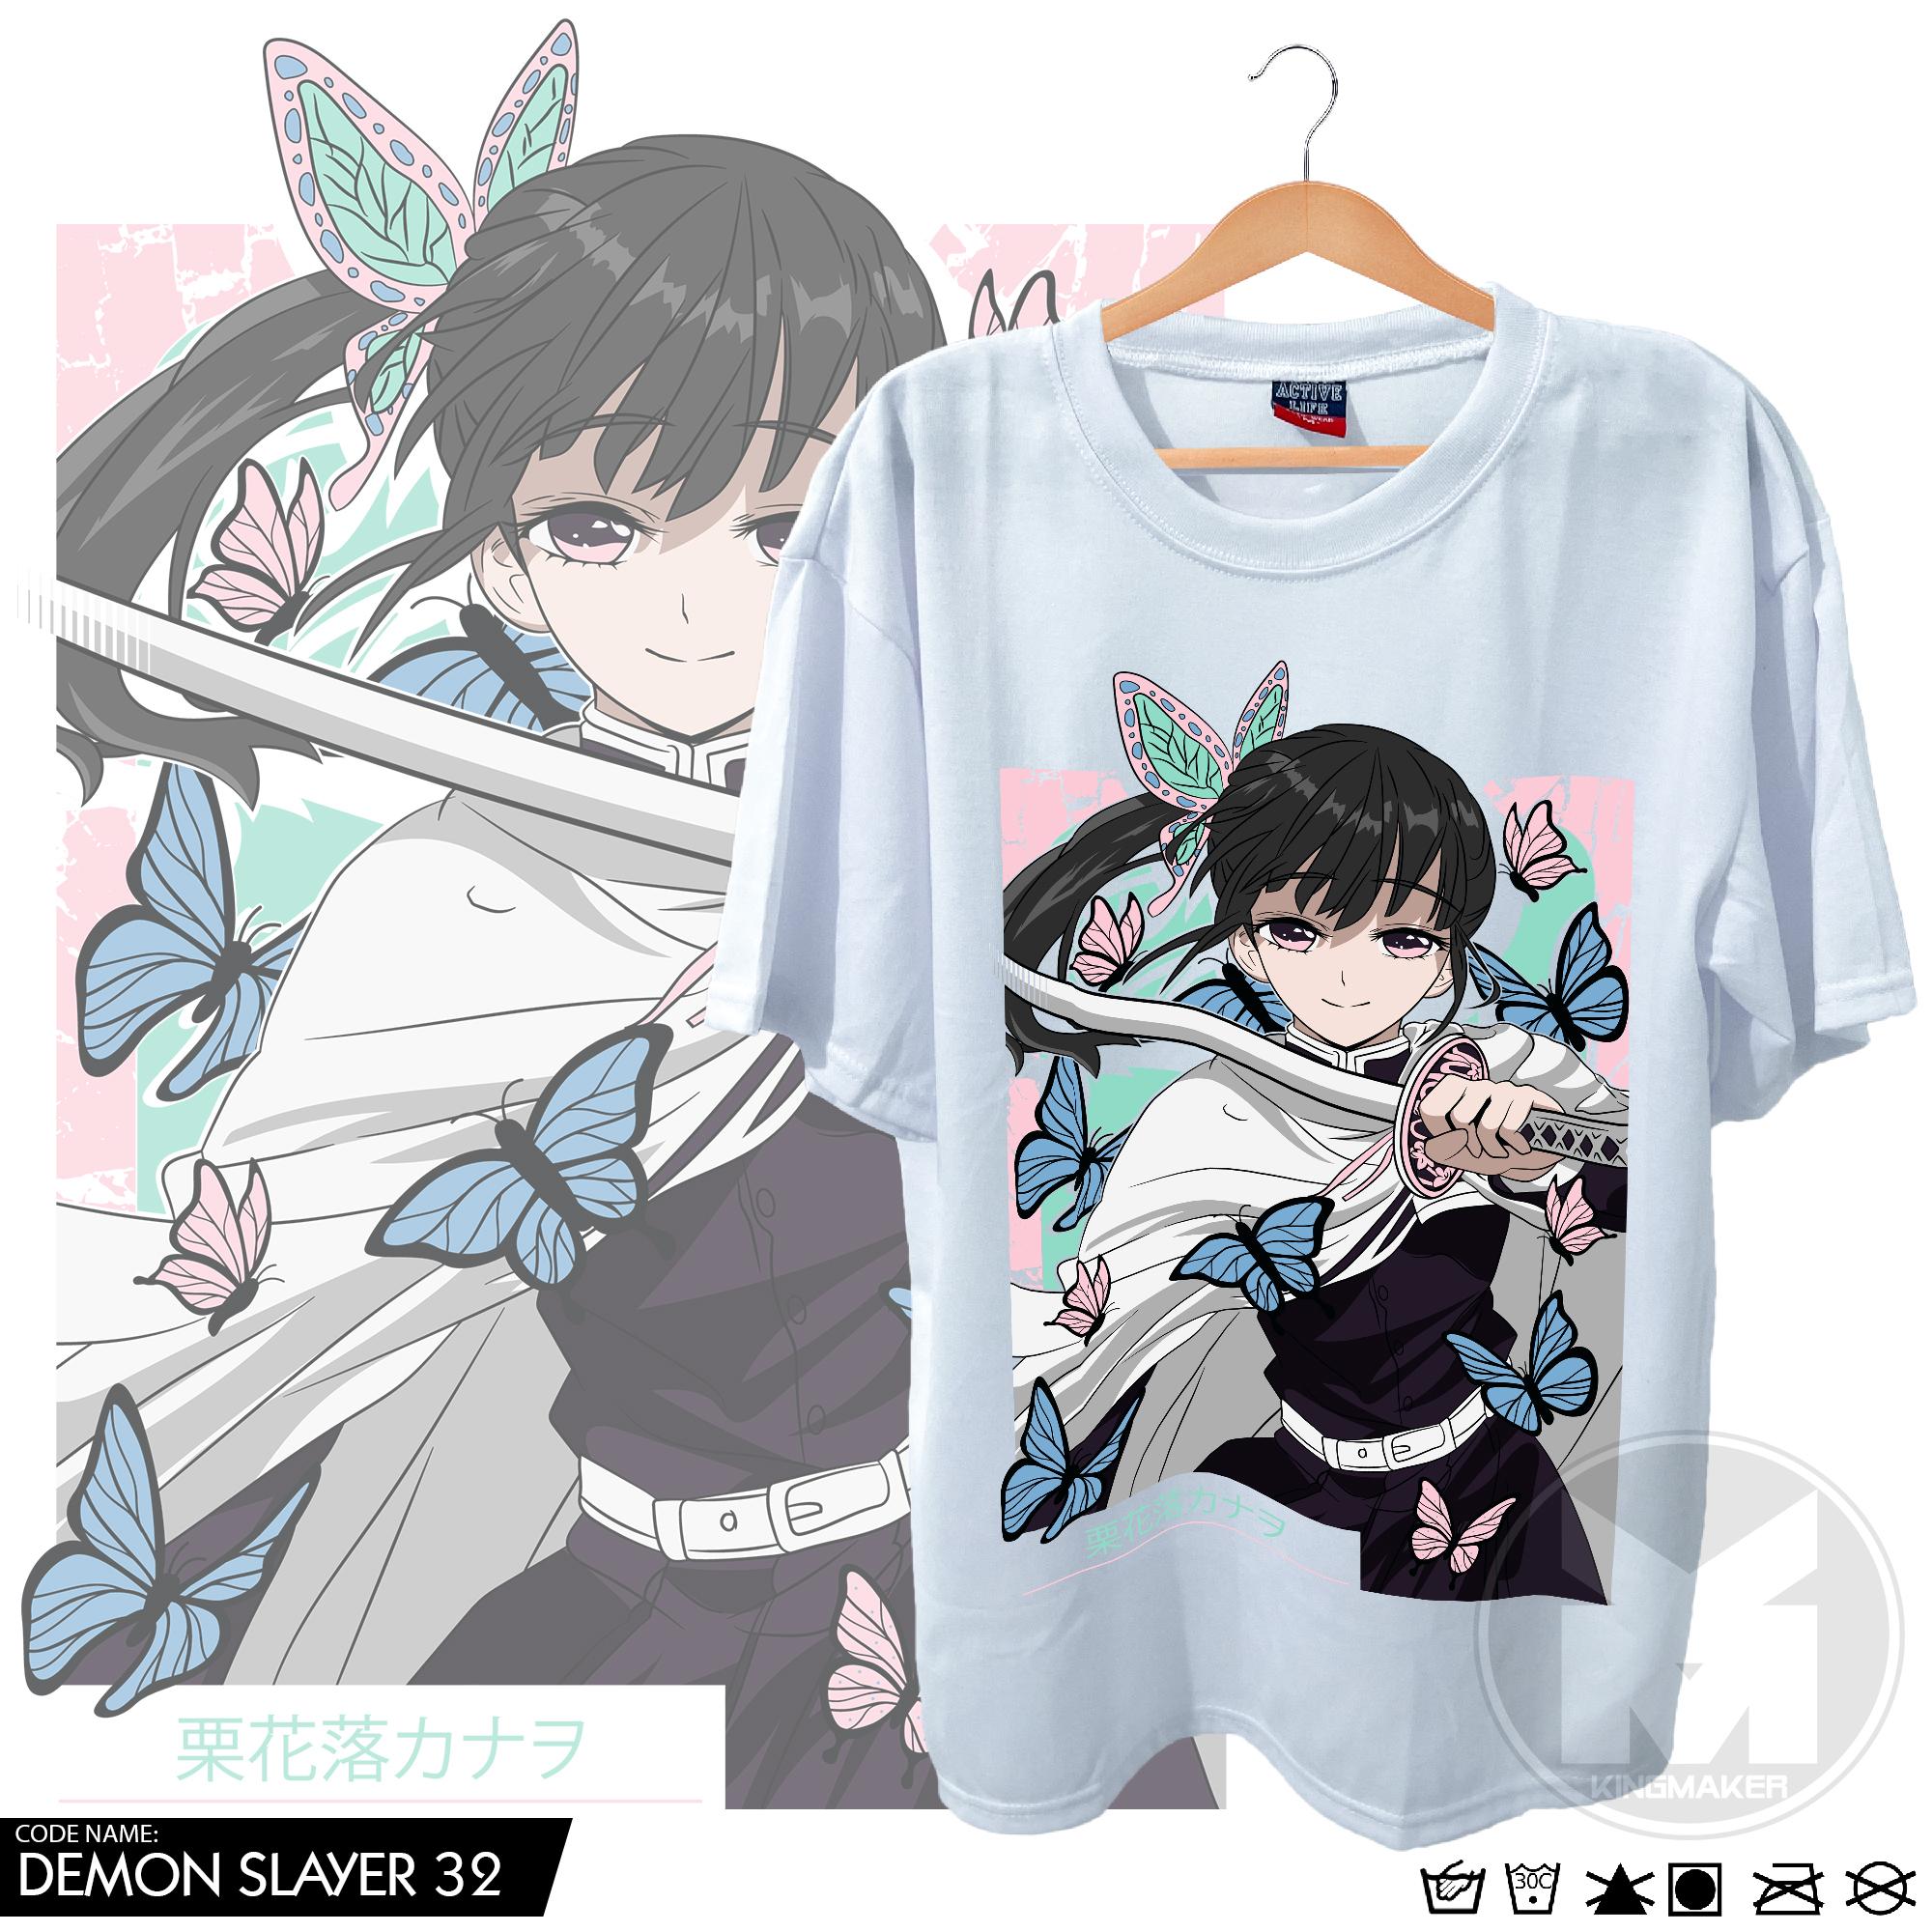 DEMON SLAYER Nezuko Kamado Design T-shirt with DTF (Direct to Film) Anime  Print Rubberized Quality Plain 80% Cotton 20% Polyester, Crew / Round Neck  for Casual Unisex Wear, fit Men Woman, Available